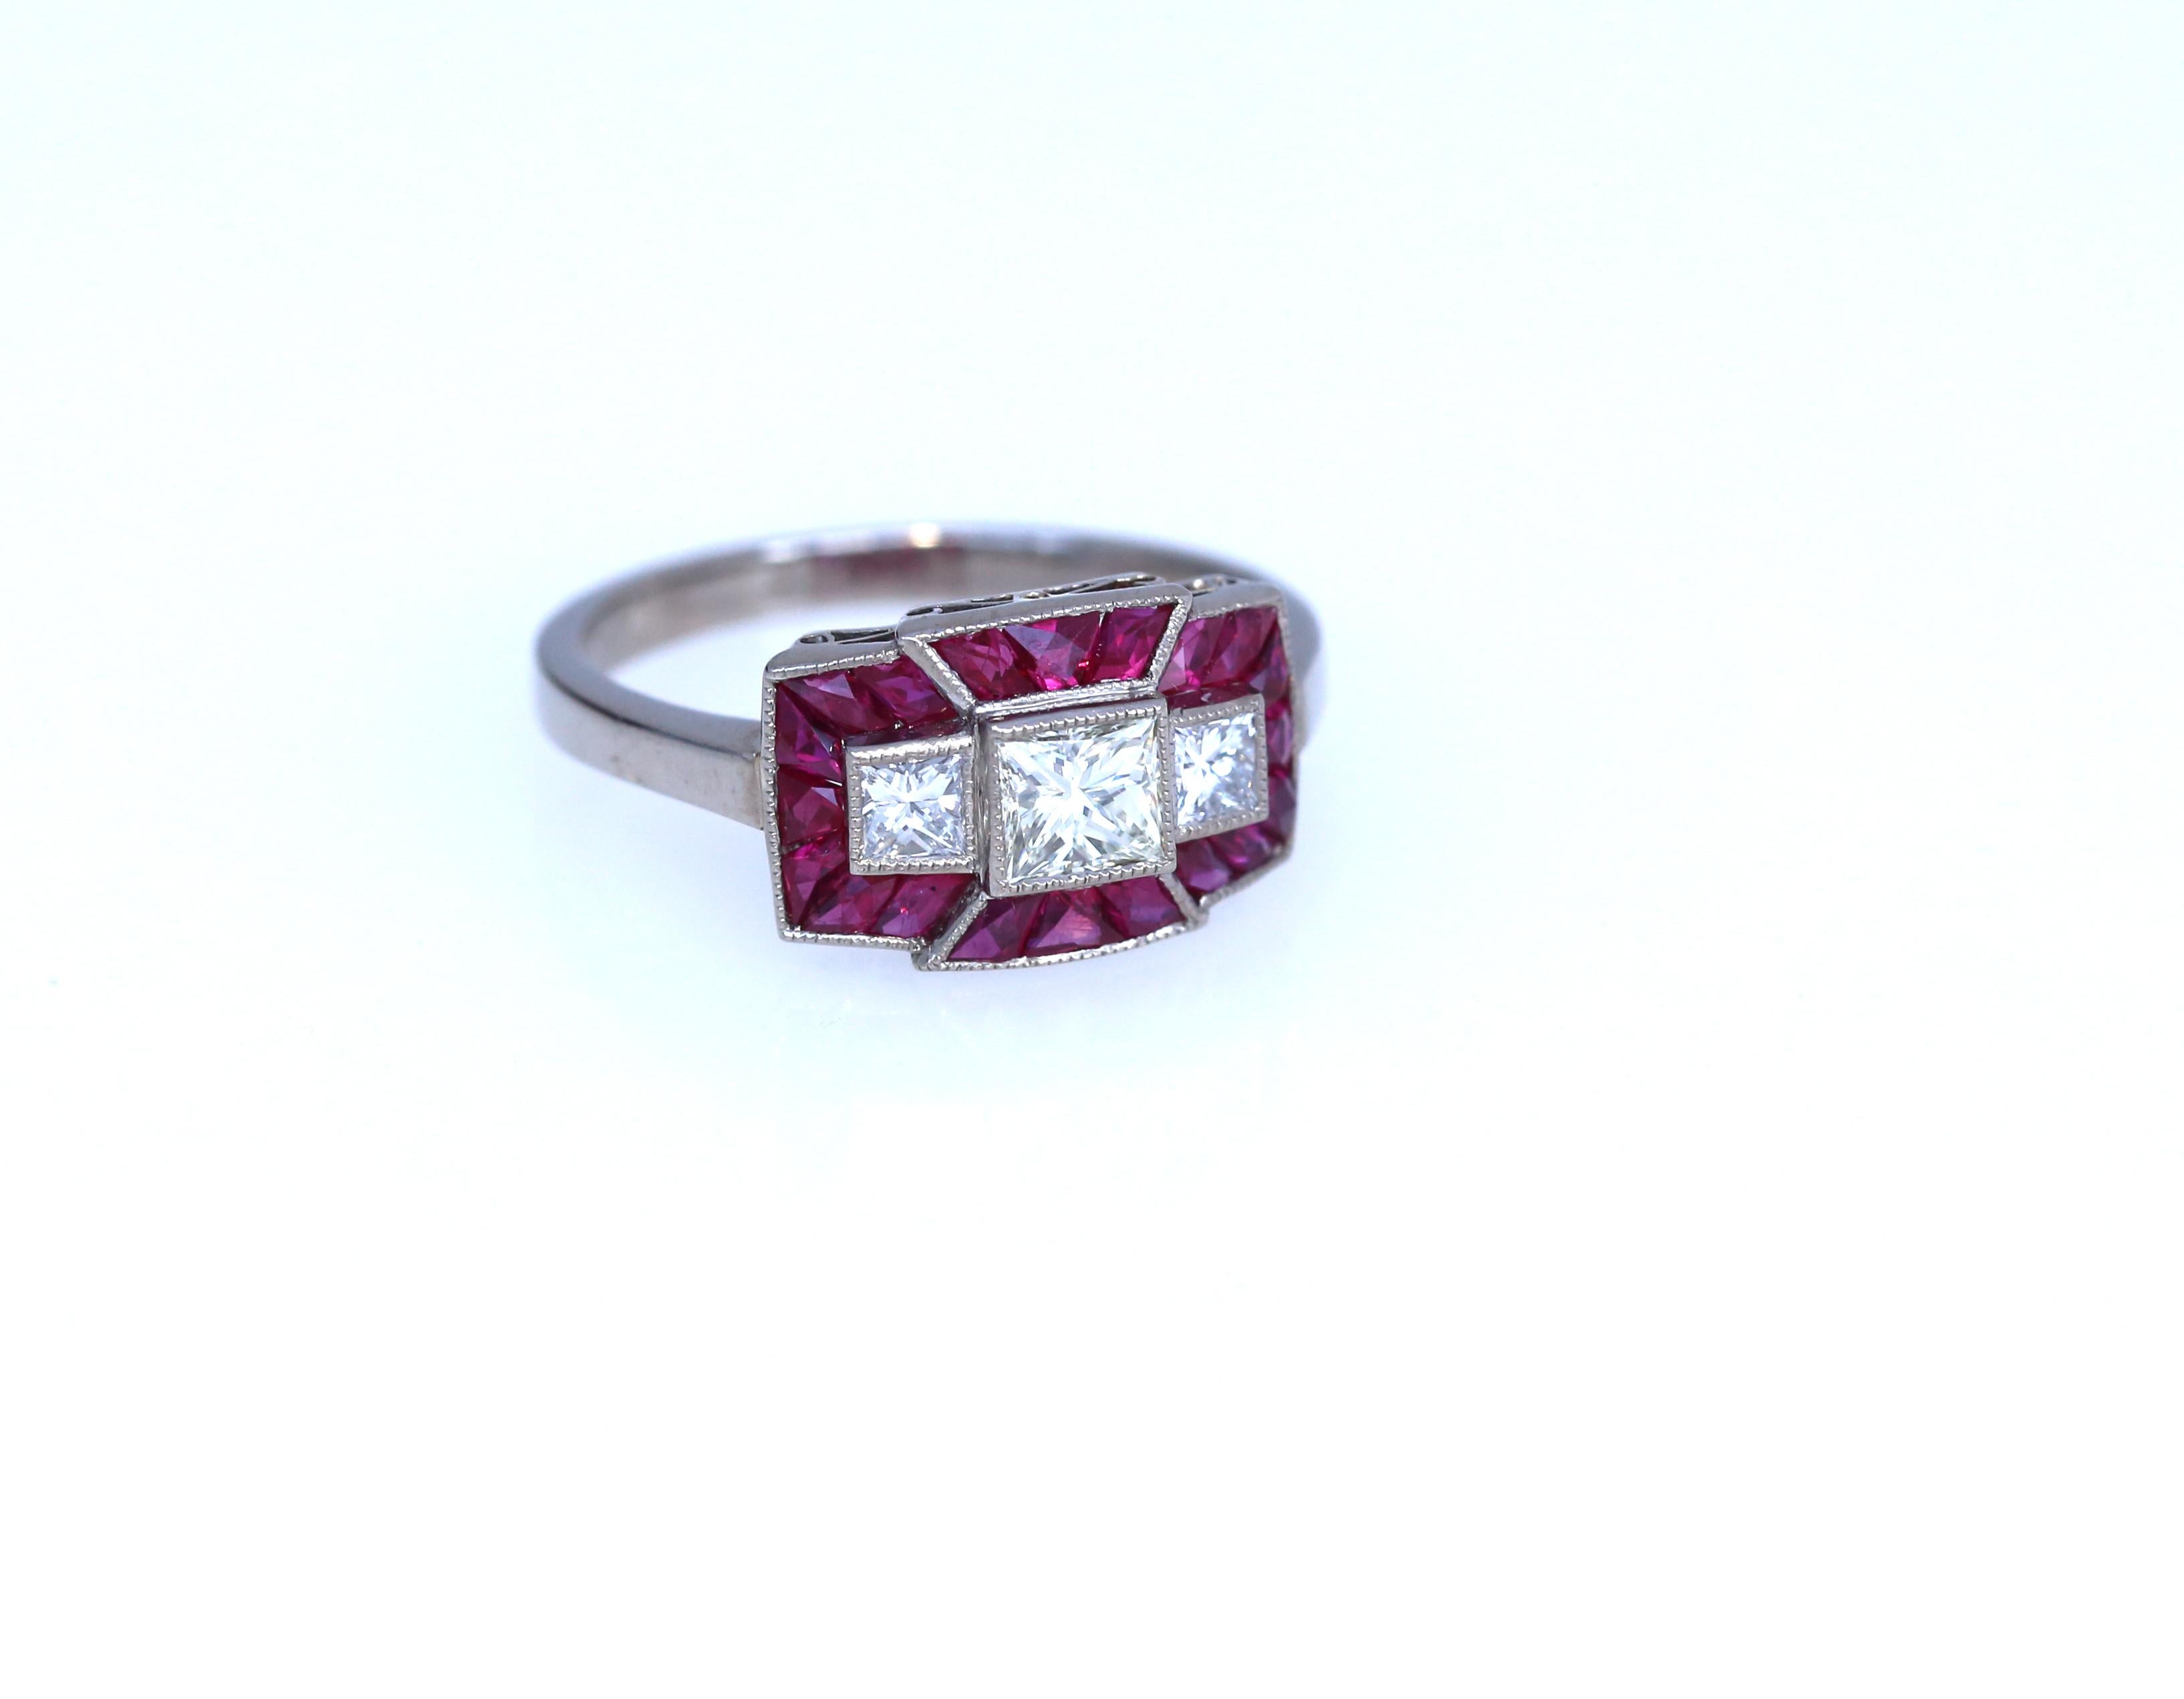 Delicate White Gold 18K ring with three Princess cut Diamonds surrounded by the special cut Rubies of fine deep red color. 1960. Elegant ring. Stamped 18K.
Total approximate weight of the Rubies is 1.2 Ct
Center princess cut Diamond approximate